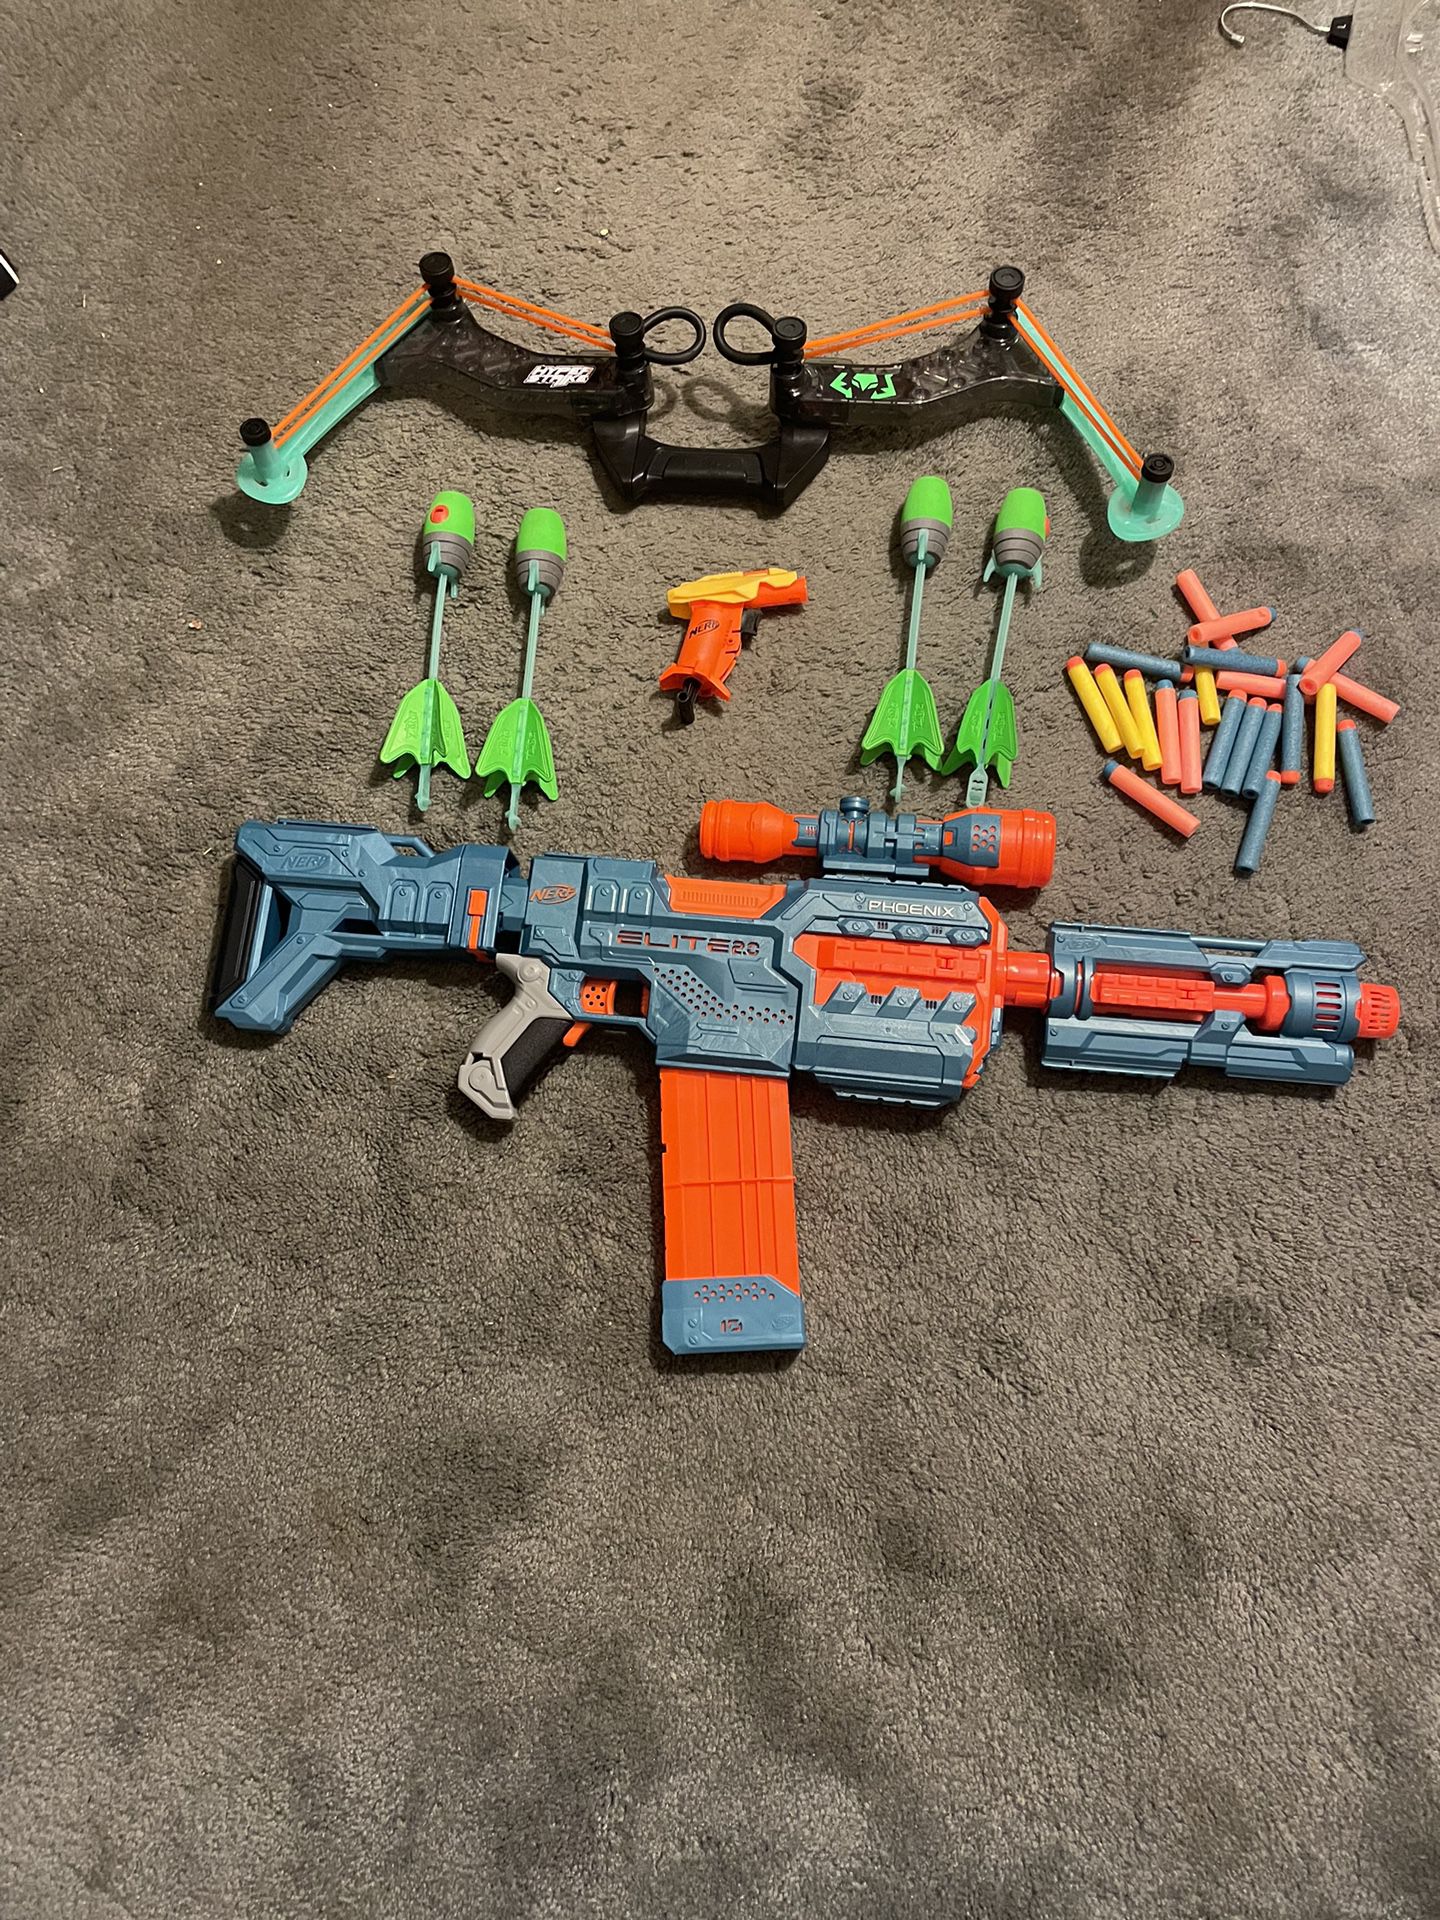 Nerf Bow And Gun With Bullets/Arrows